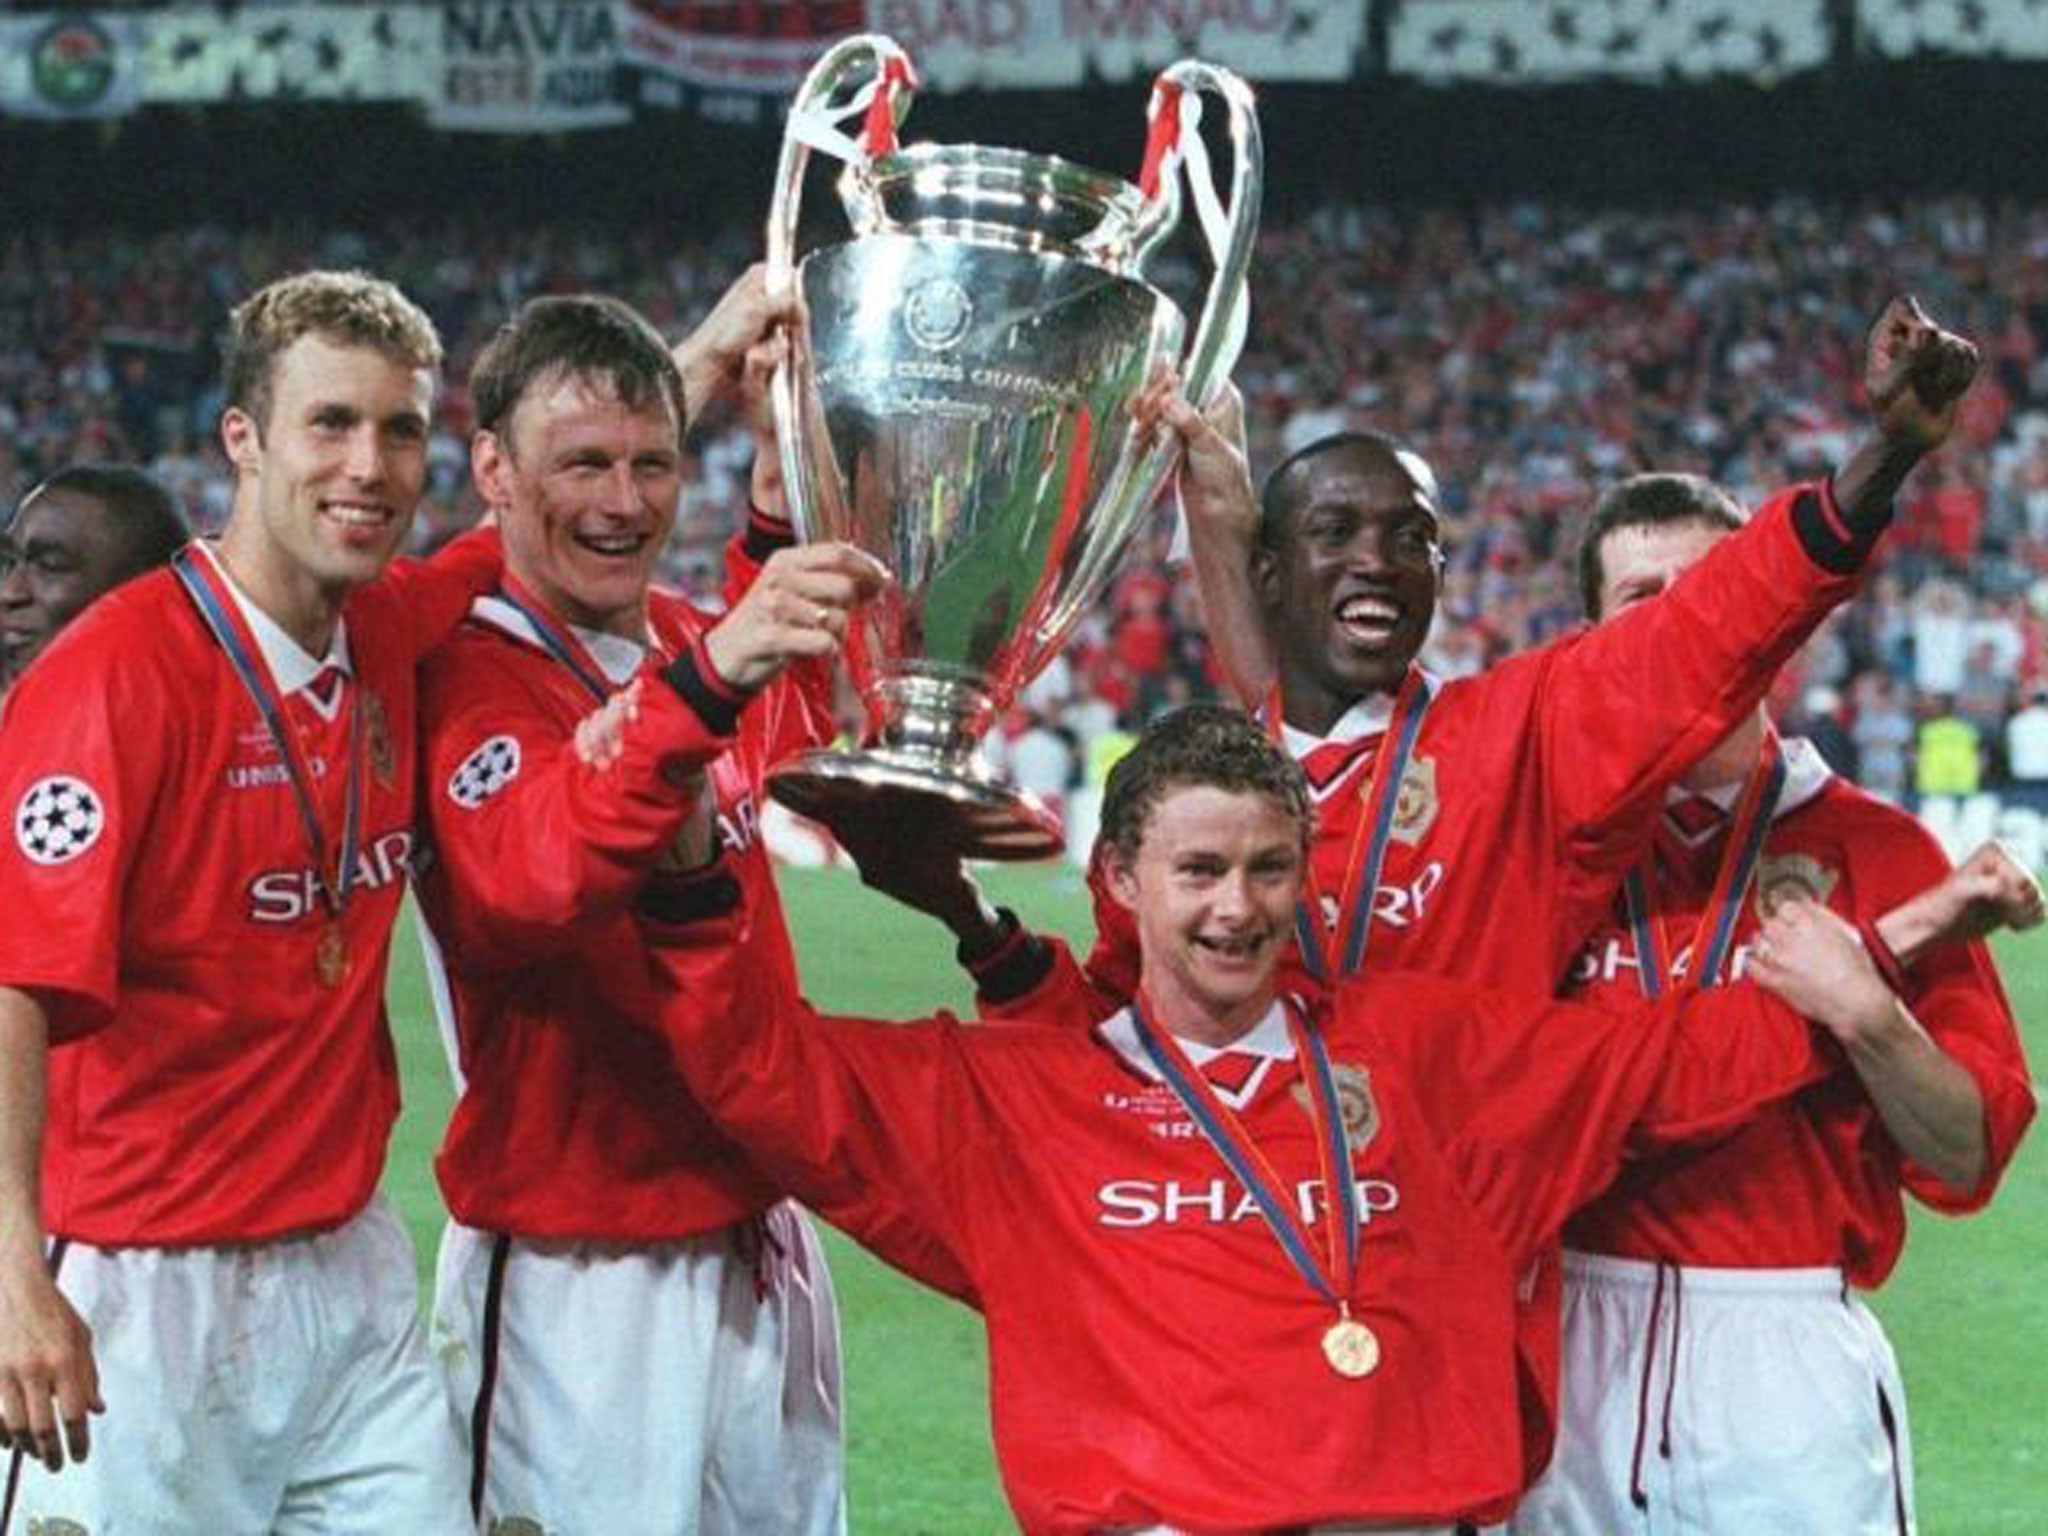 United players wearing Umbro kit win the Champions League in 1999